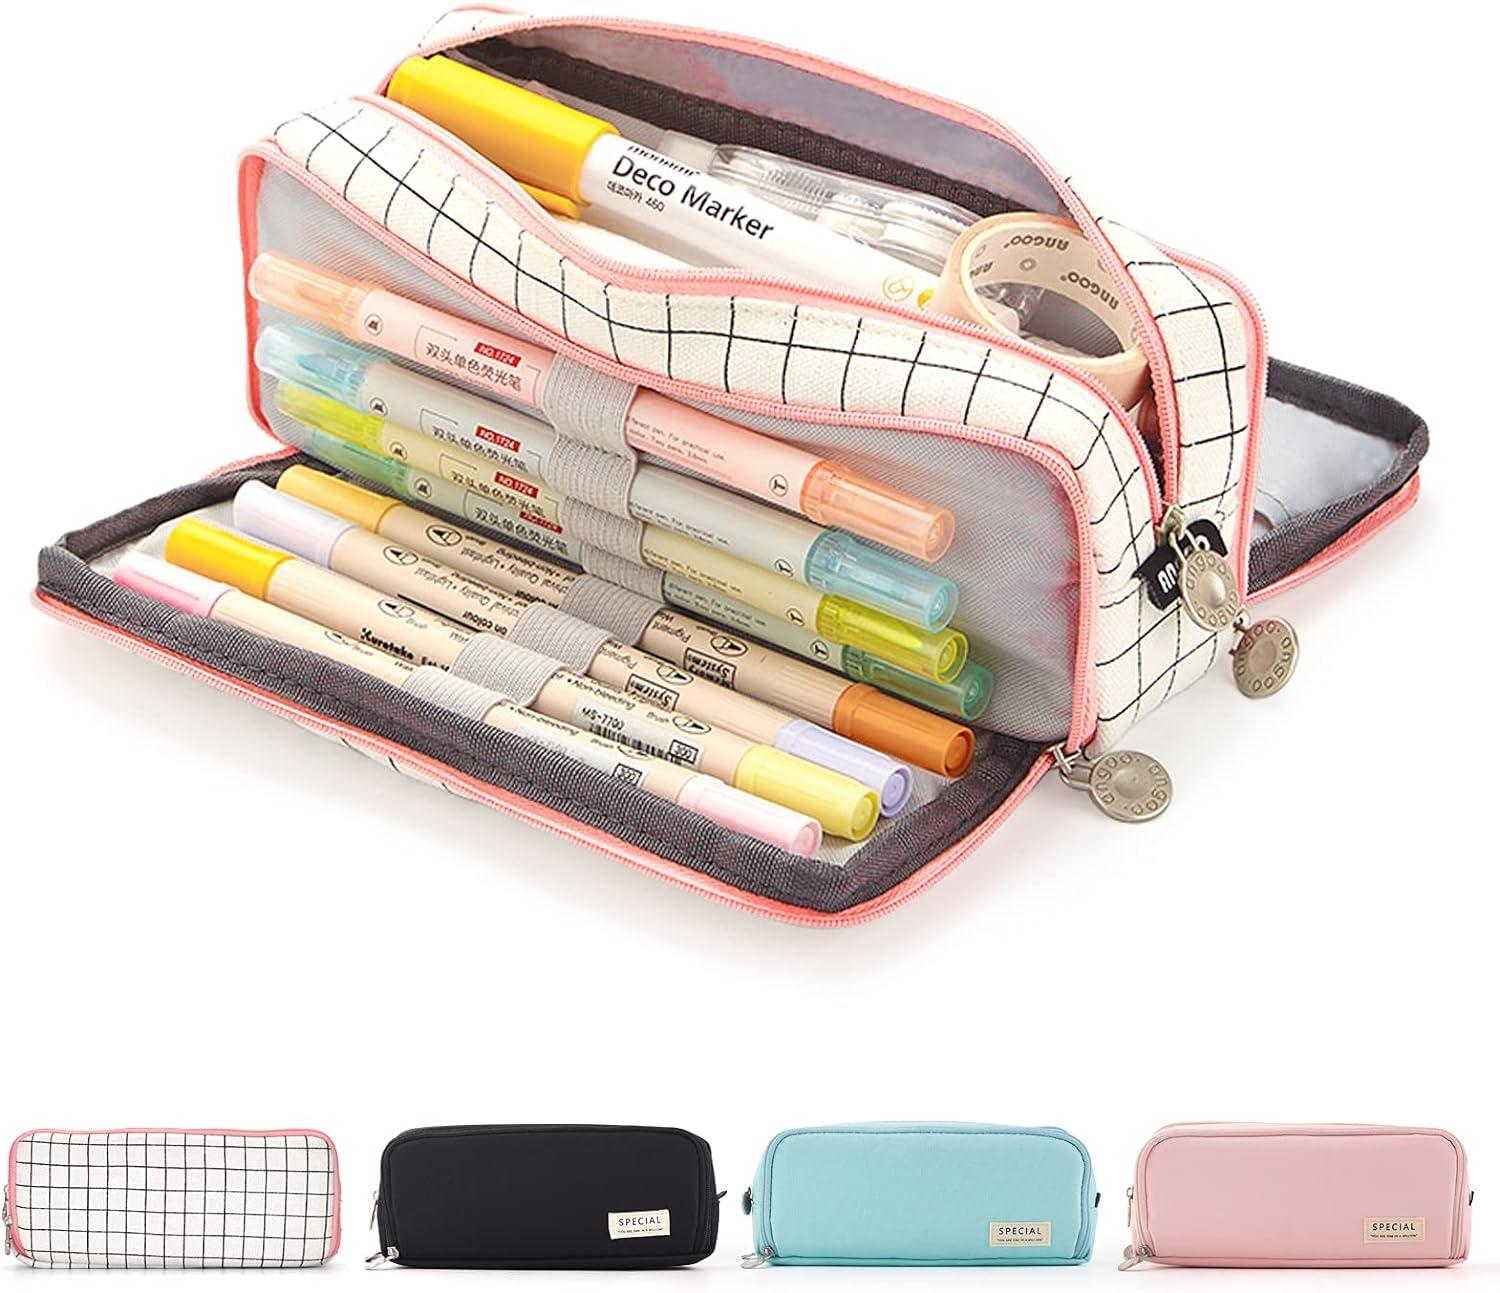 maomaoyu pencil case with 3 compartments pencil case large capacity pencil pouch for stationary organizer